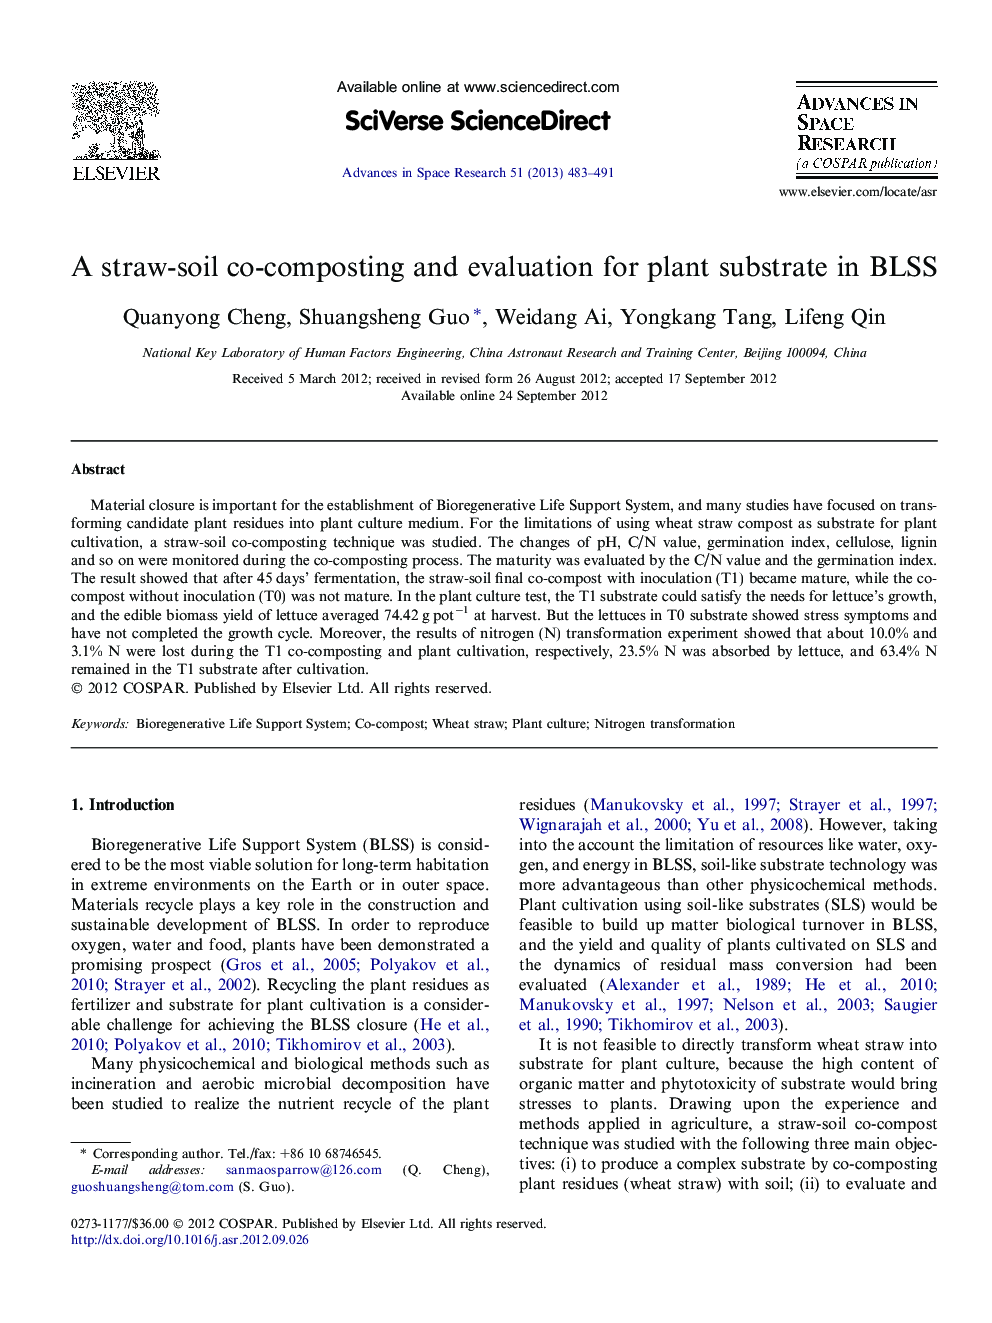 A straw-soil co-composting and evaluation for plant substrate in BLSS